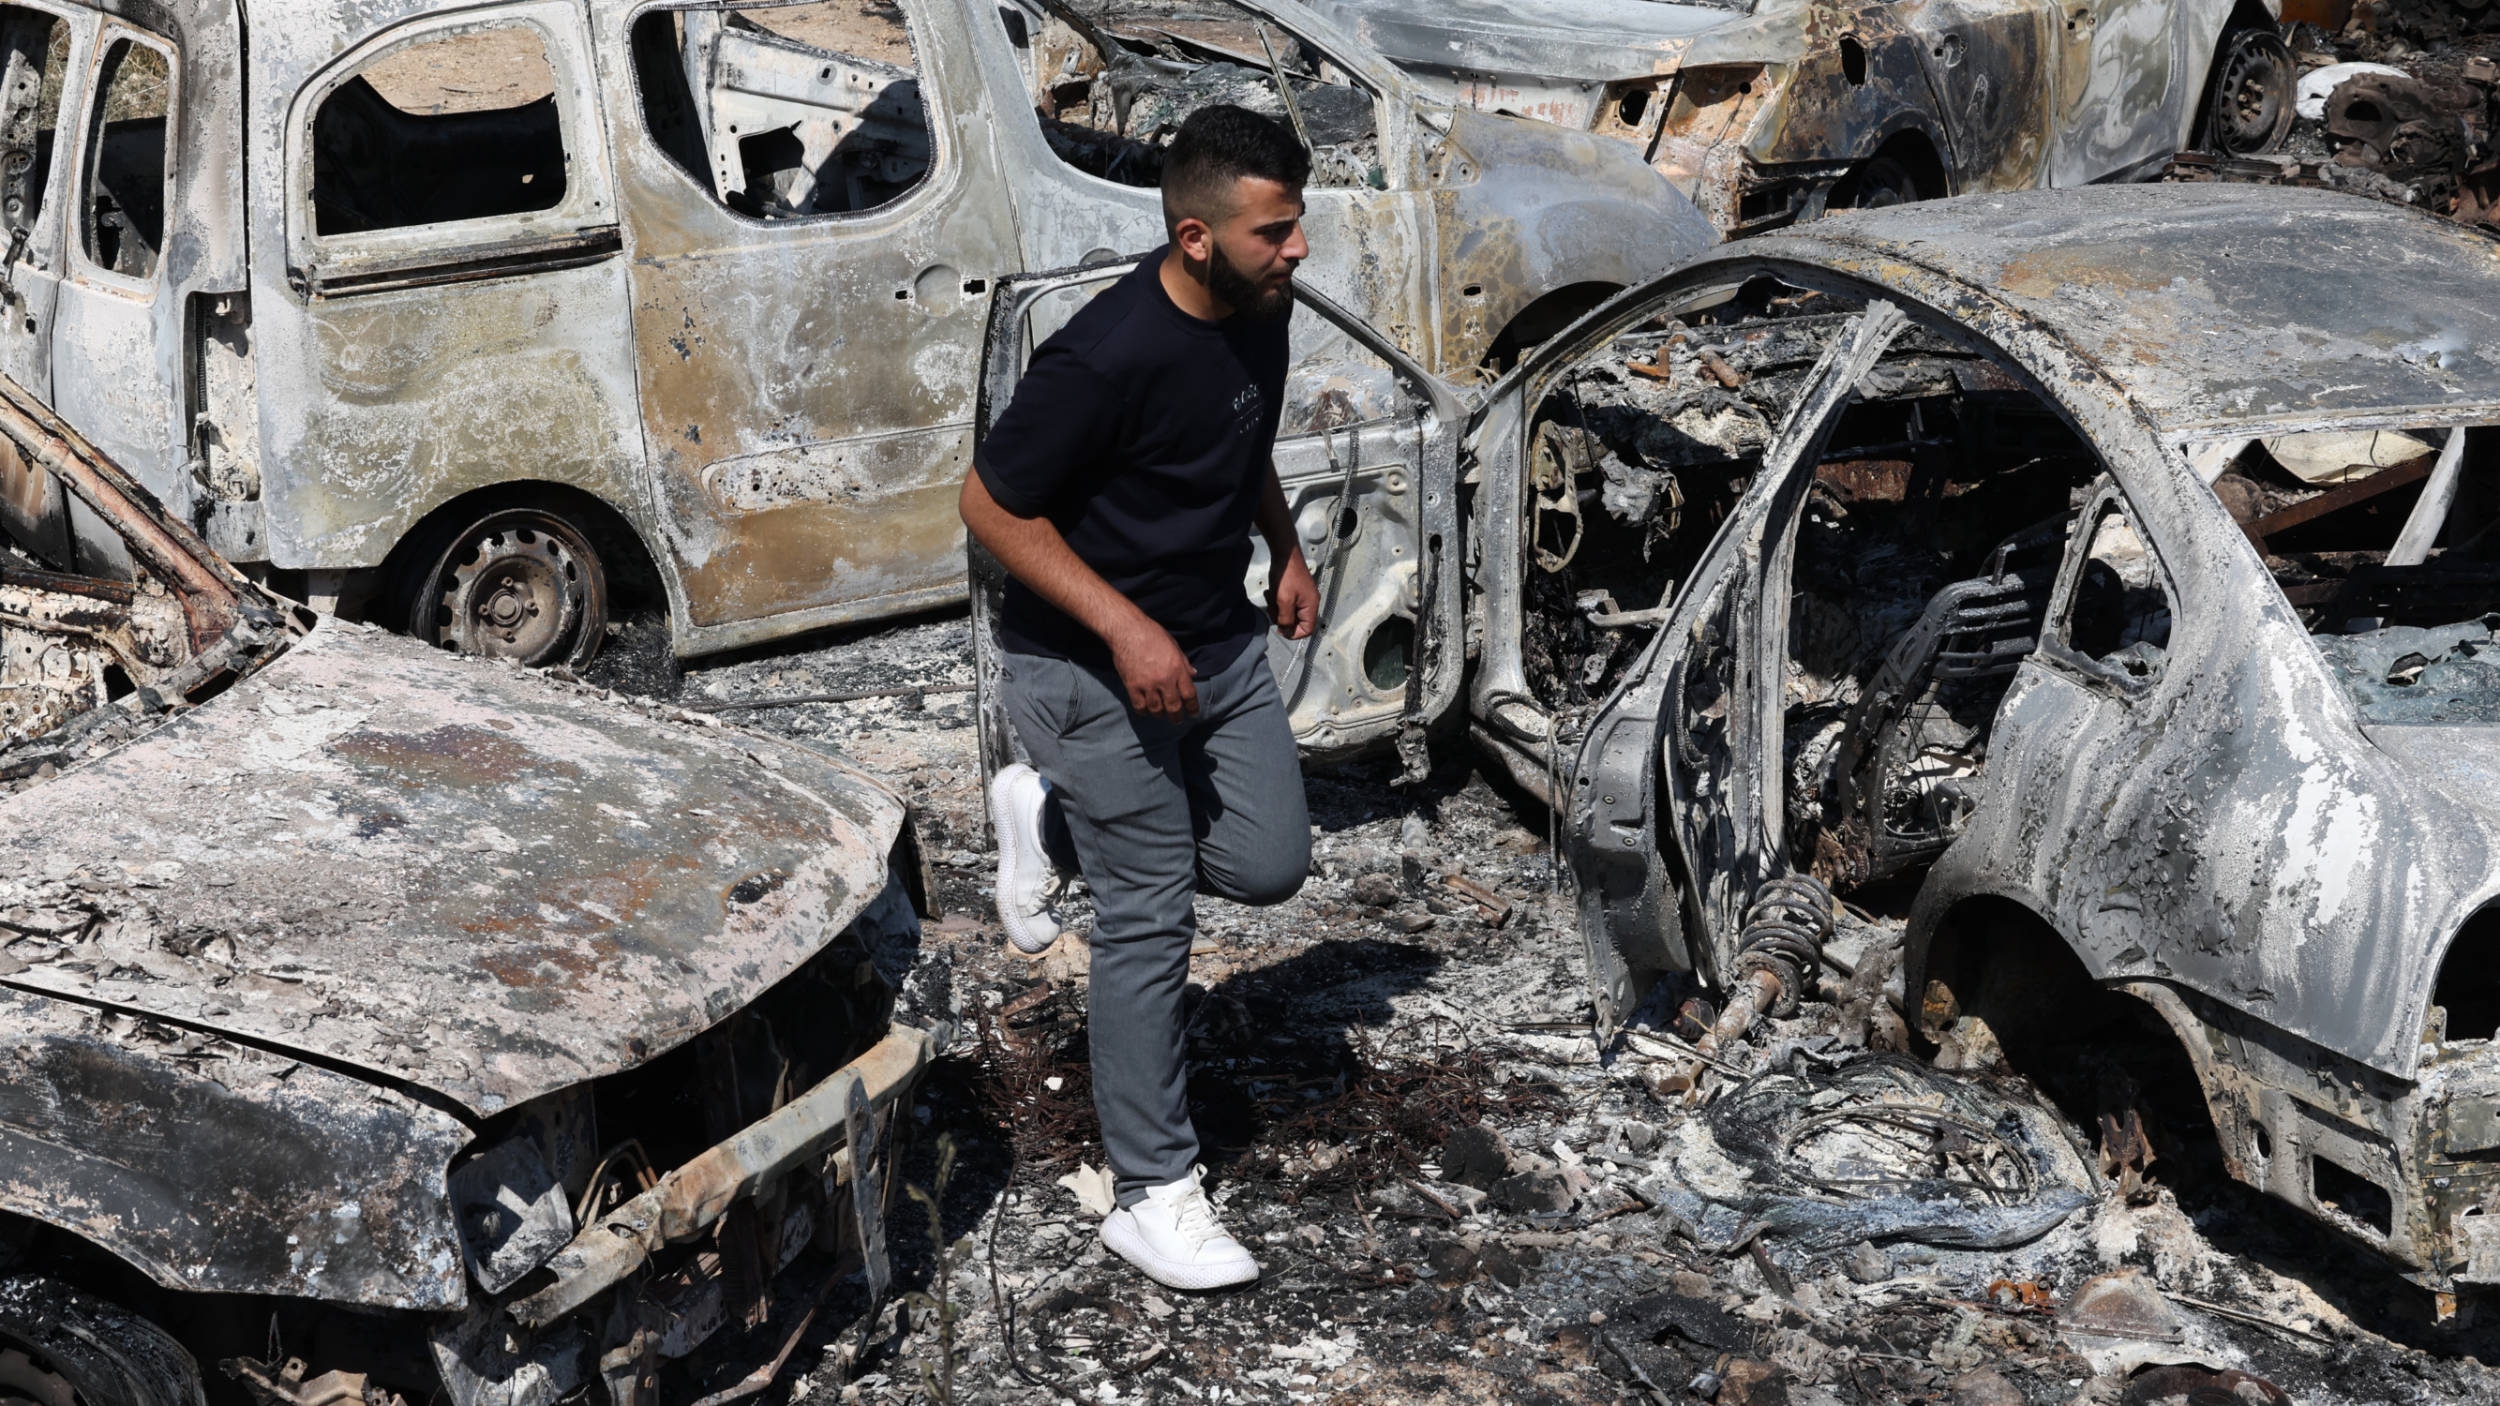 A man walks amidst burnt cars, which were set ablaze by Israeli settlers, in the area of in al-Lubban al-Sharqiya in the occupied West Bank on June 21, 2023.